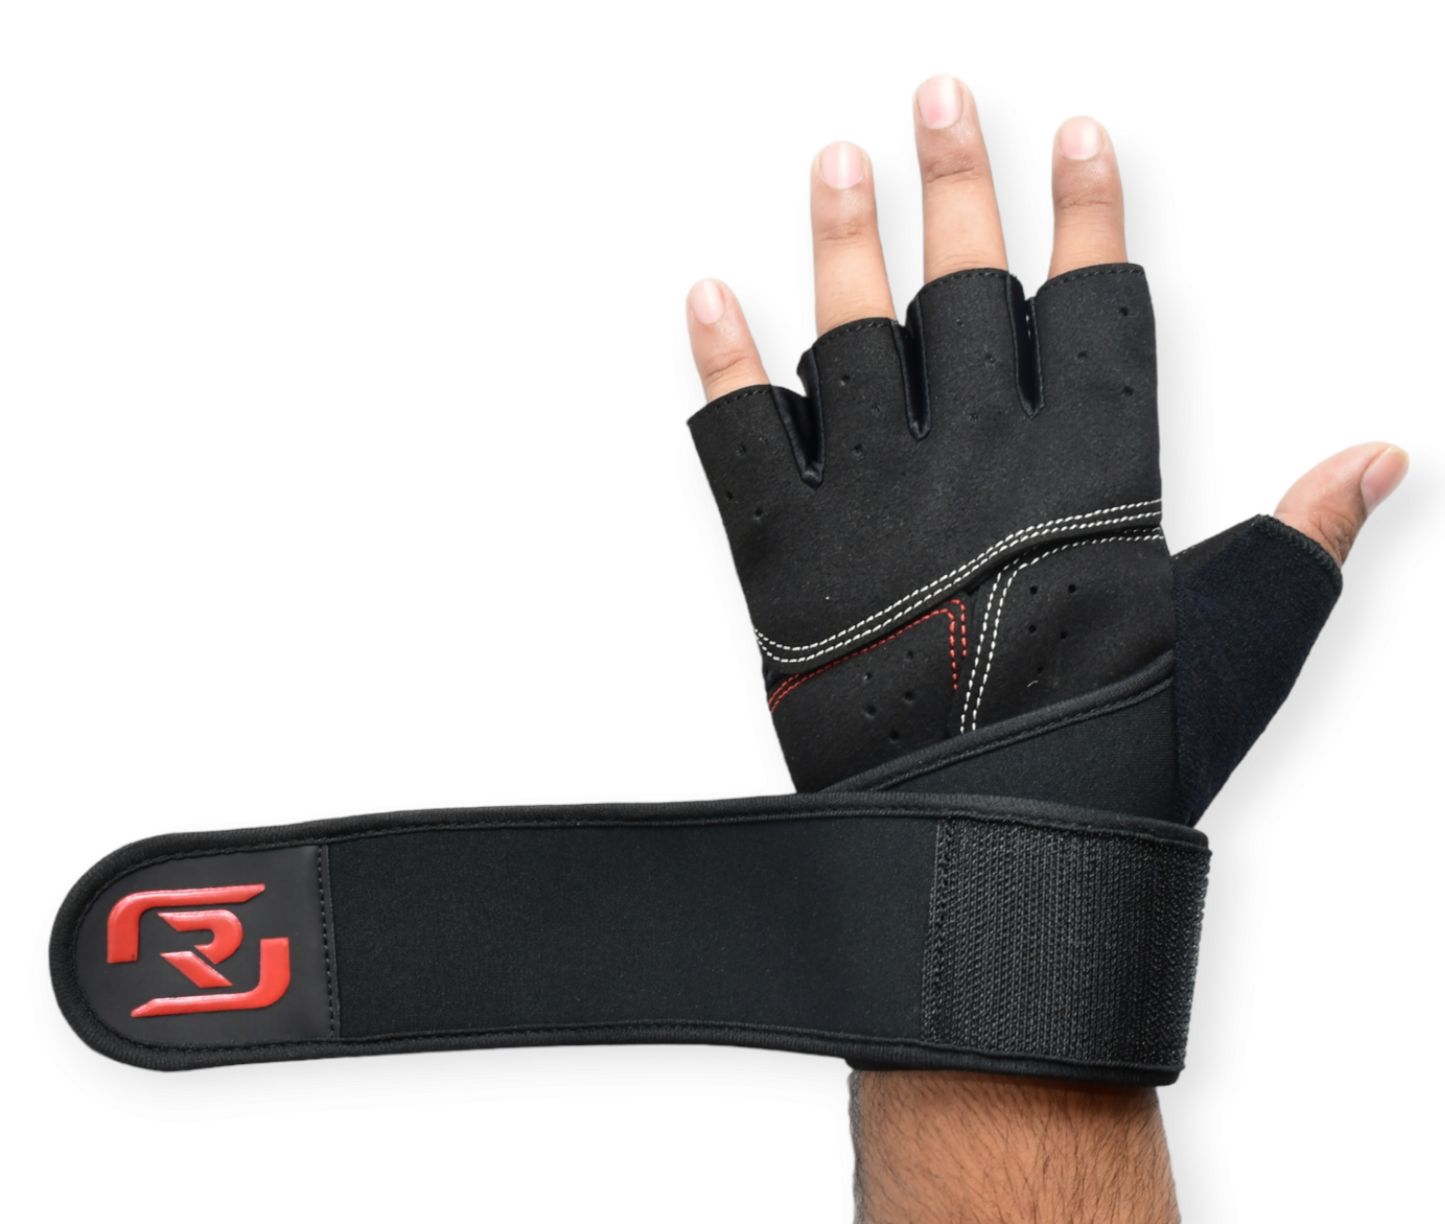 Ronex Leather Weight Lifting Workout Gym Gloves with Wrist Support